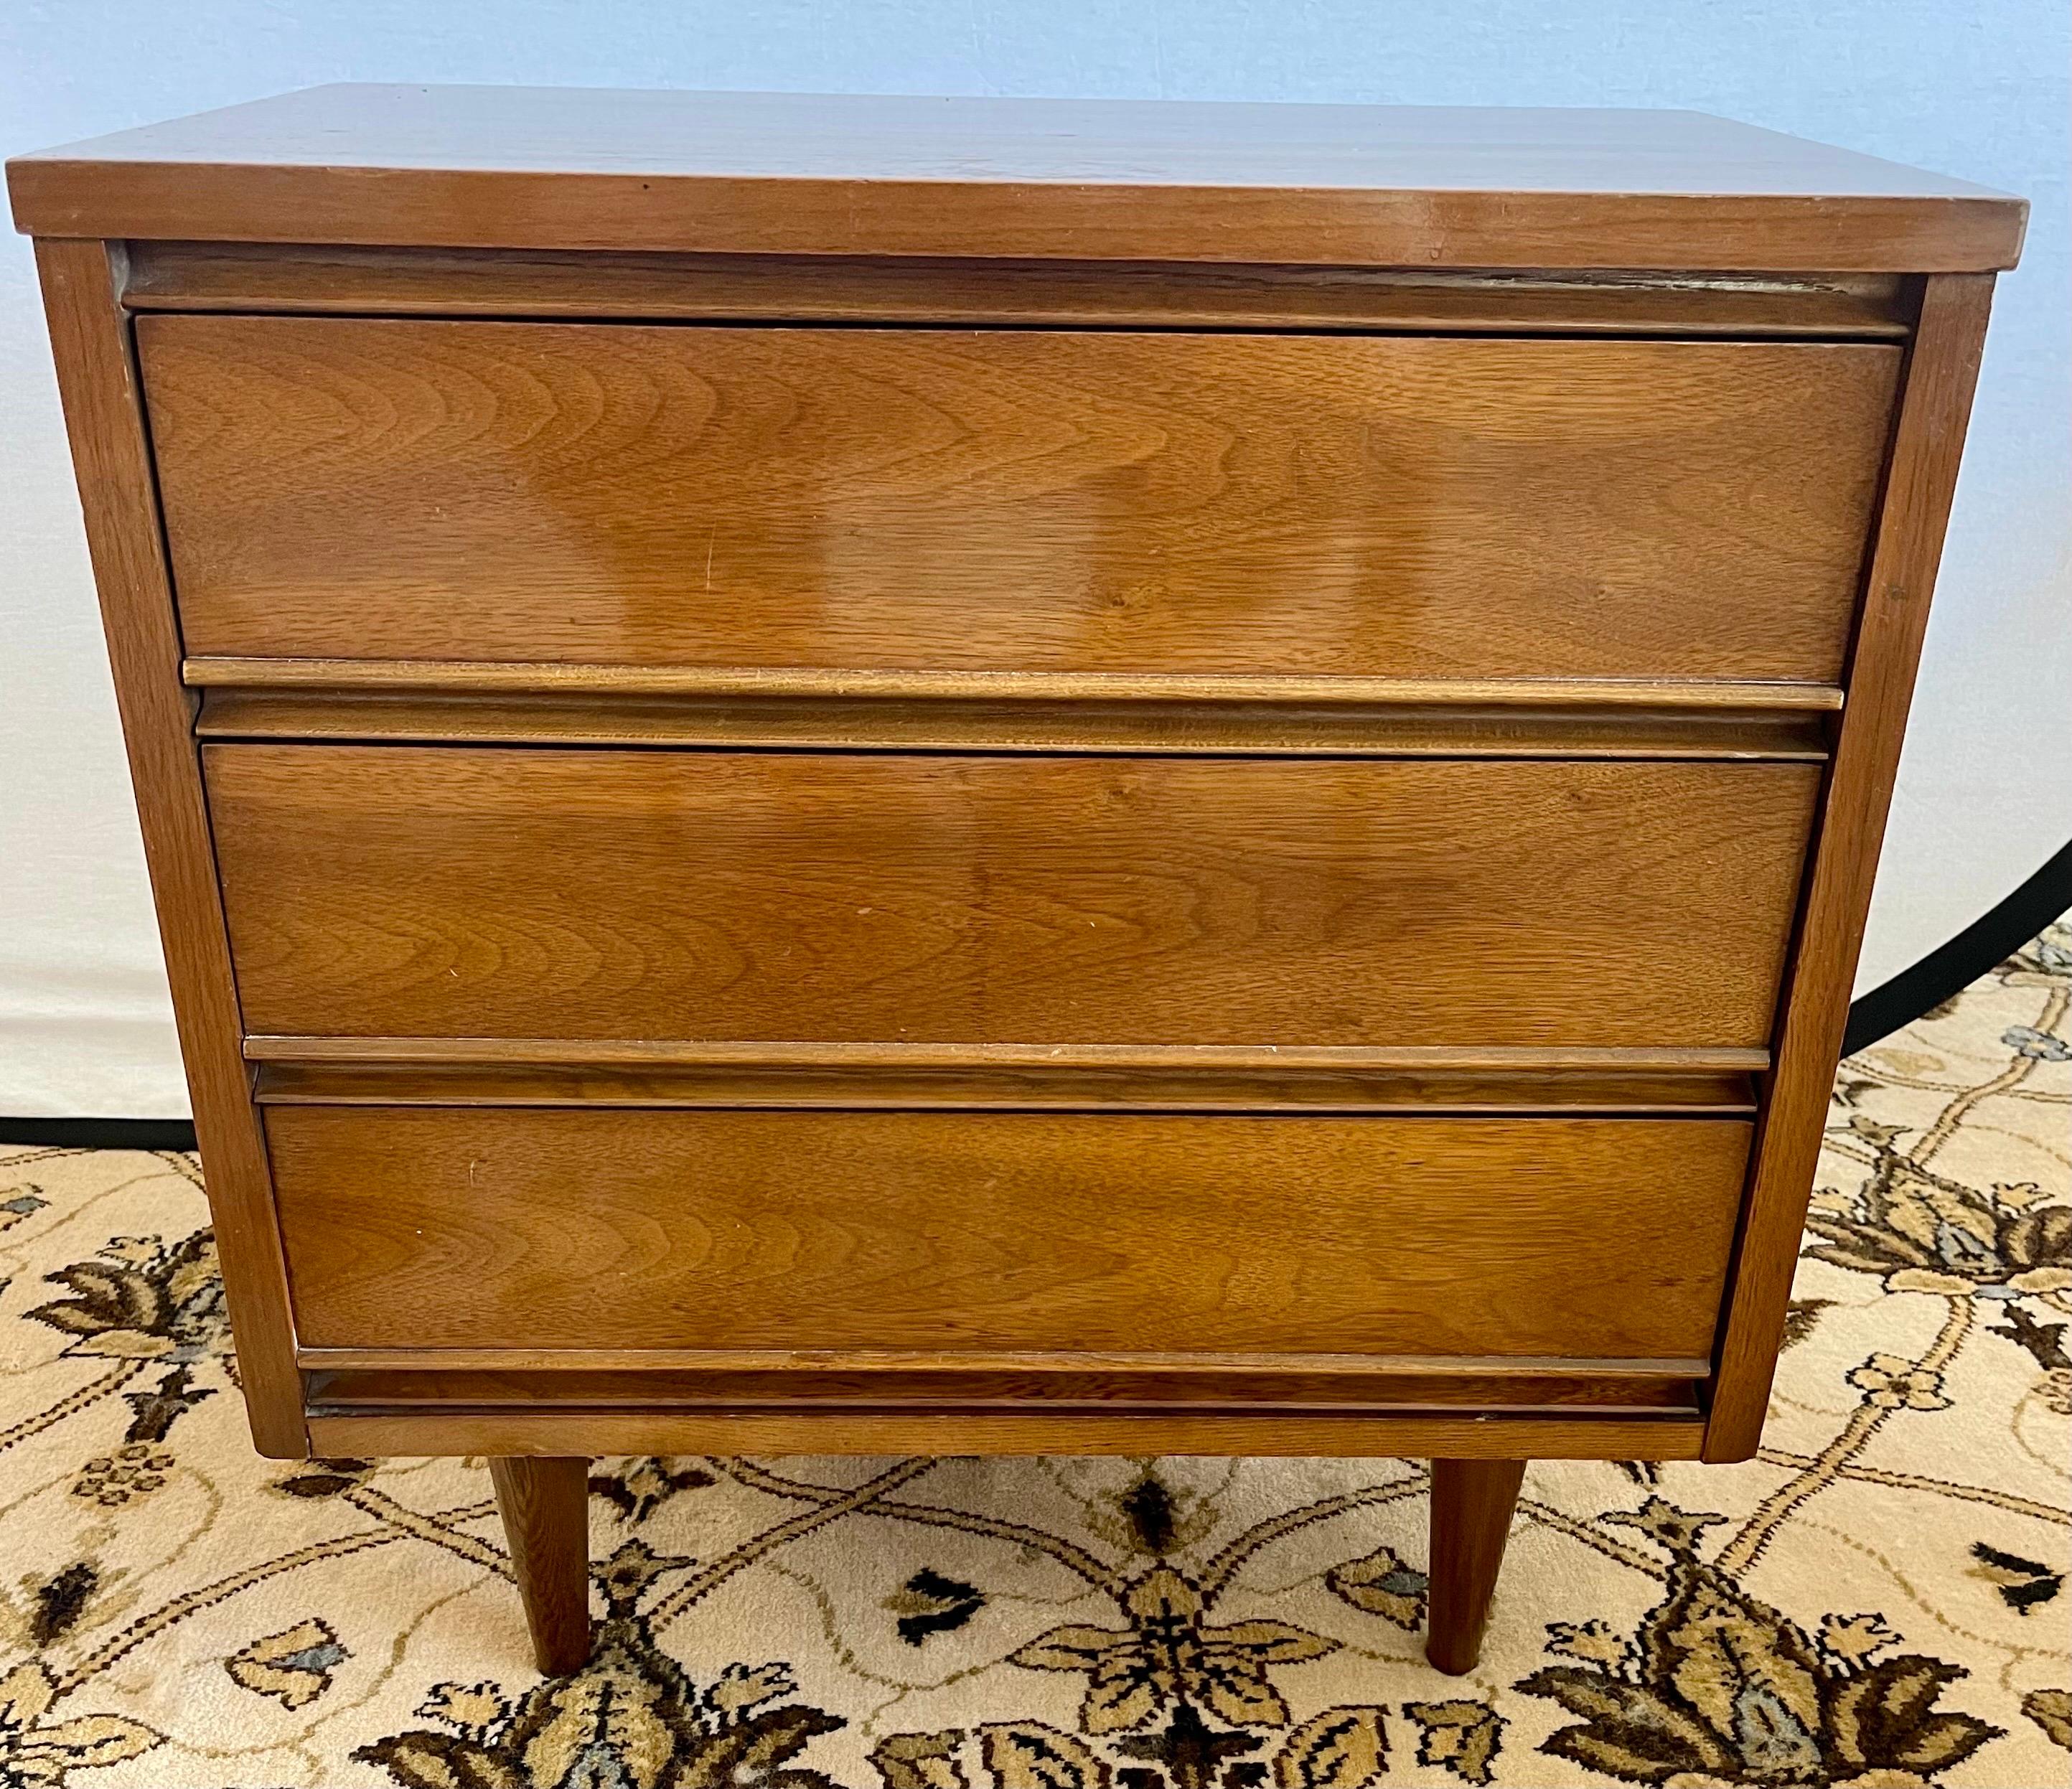 Coveted Mid-Century Modern nightstand with storage by Dixie Furniture.
Great lines and better scale. Why not own the good stuff.